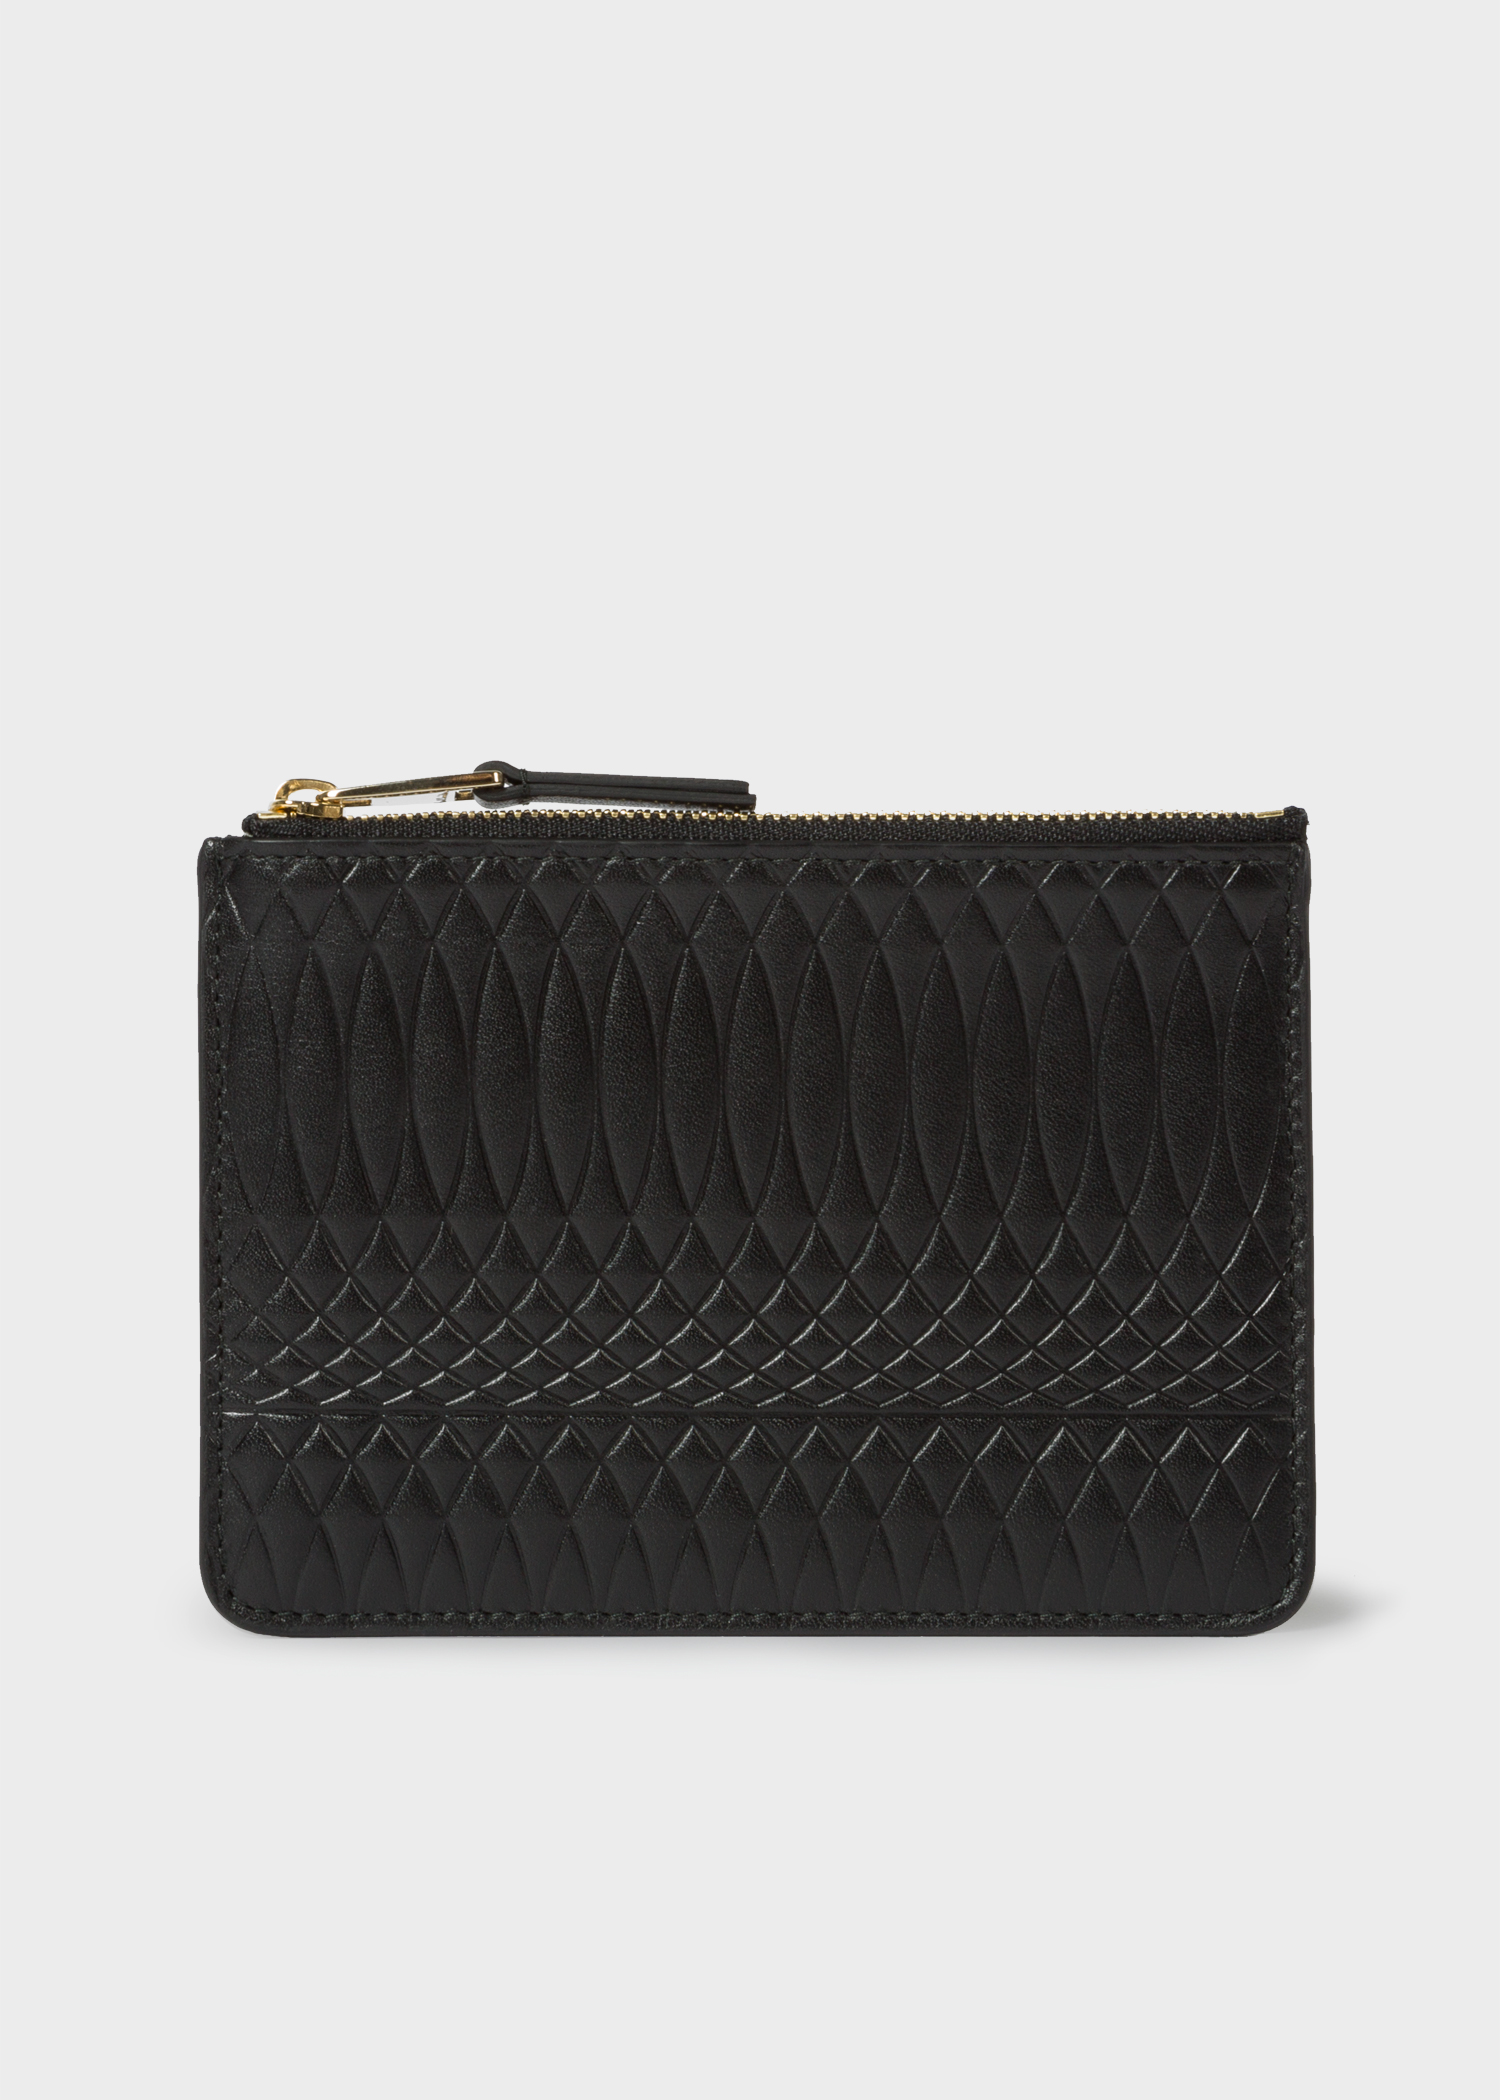 Paul Smith No.9 - Black Leather Zip Pouch - Paul Smith